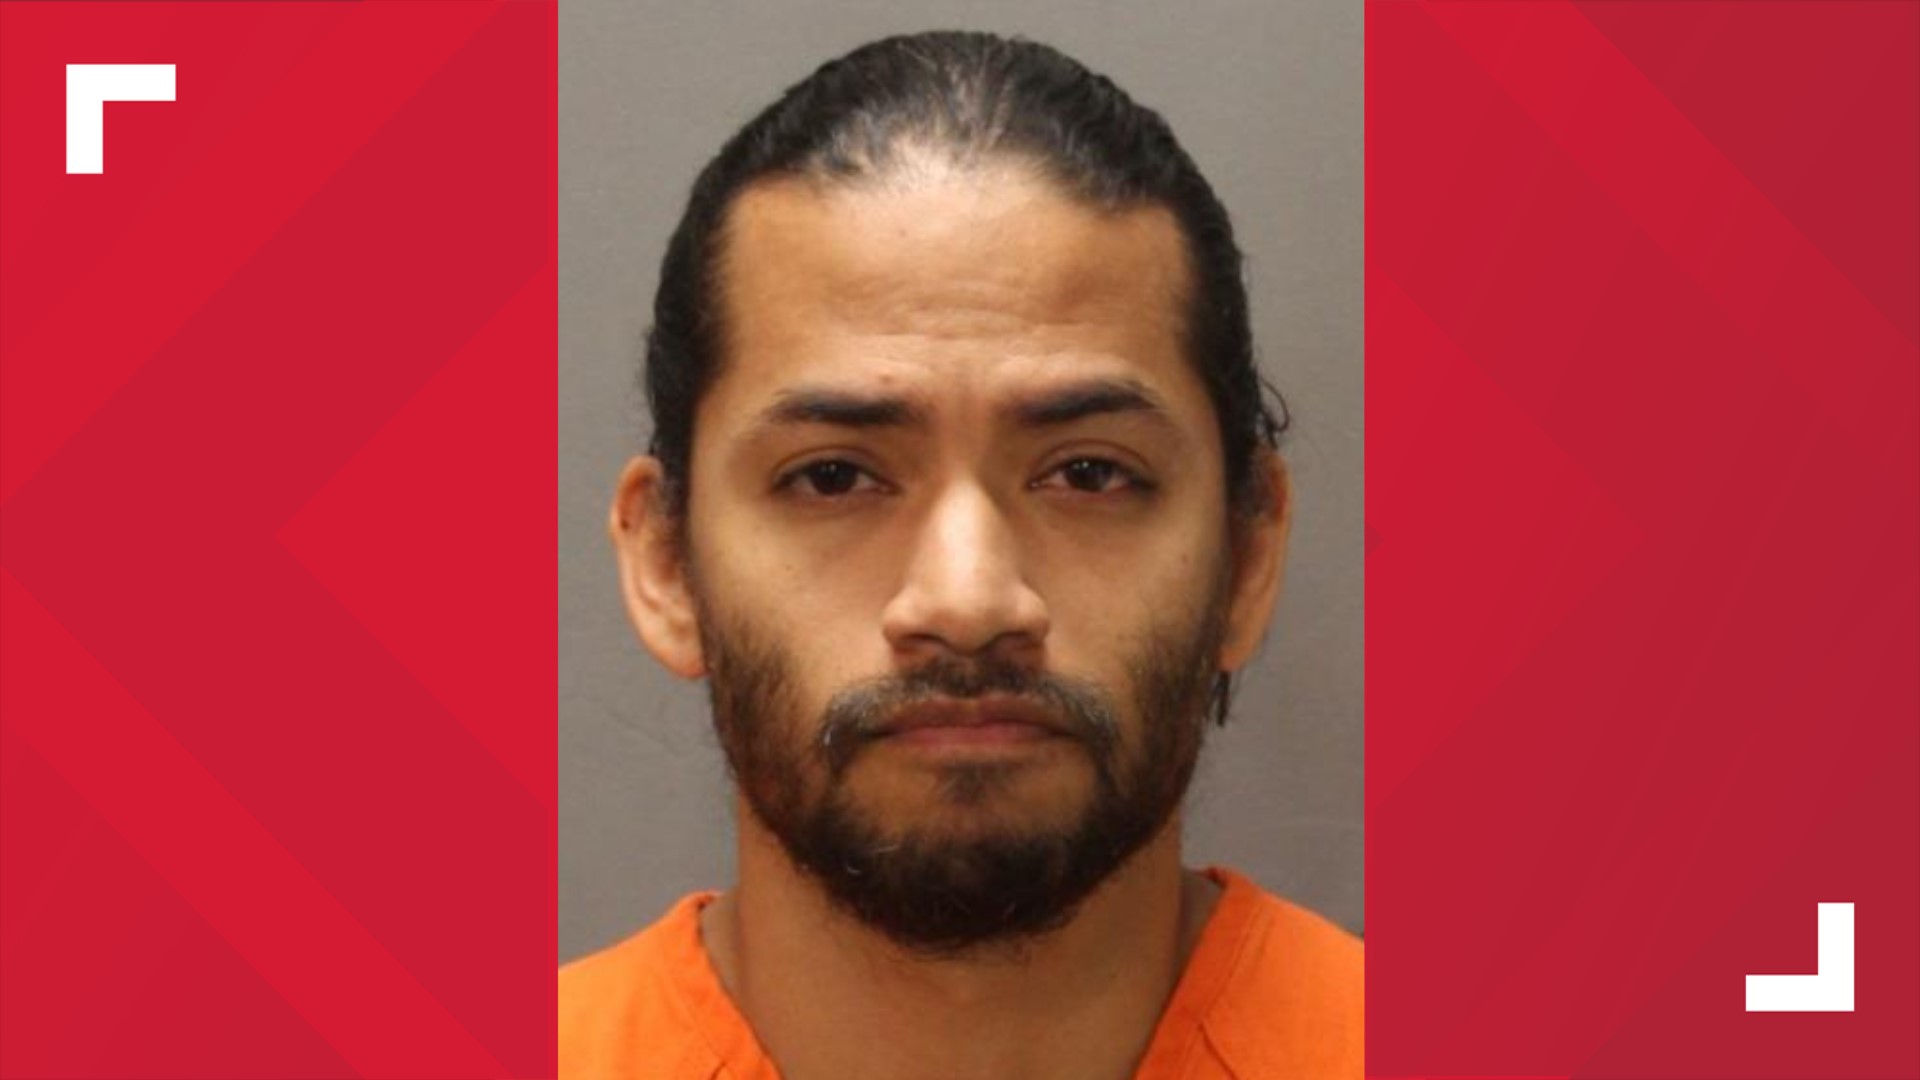 Mario Fernandez Saldana is one of two men charged in the killing of Jared Bridegan. He appeared in Duval County court for the first time on Thursday.